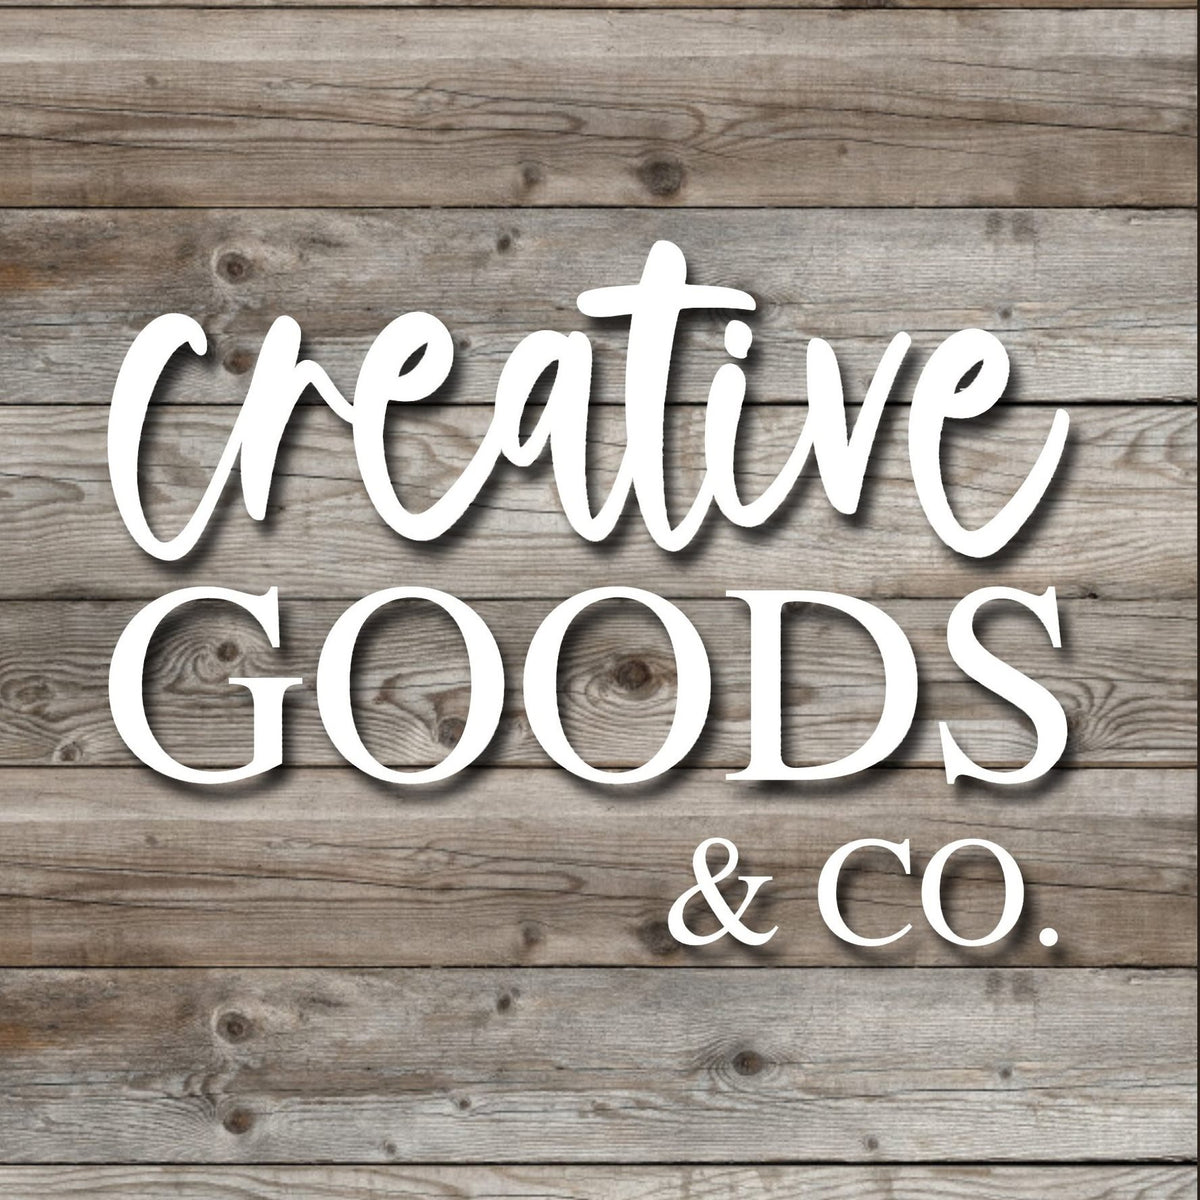 Fish Lures and Camping – Creative Goods & Co.